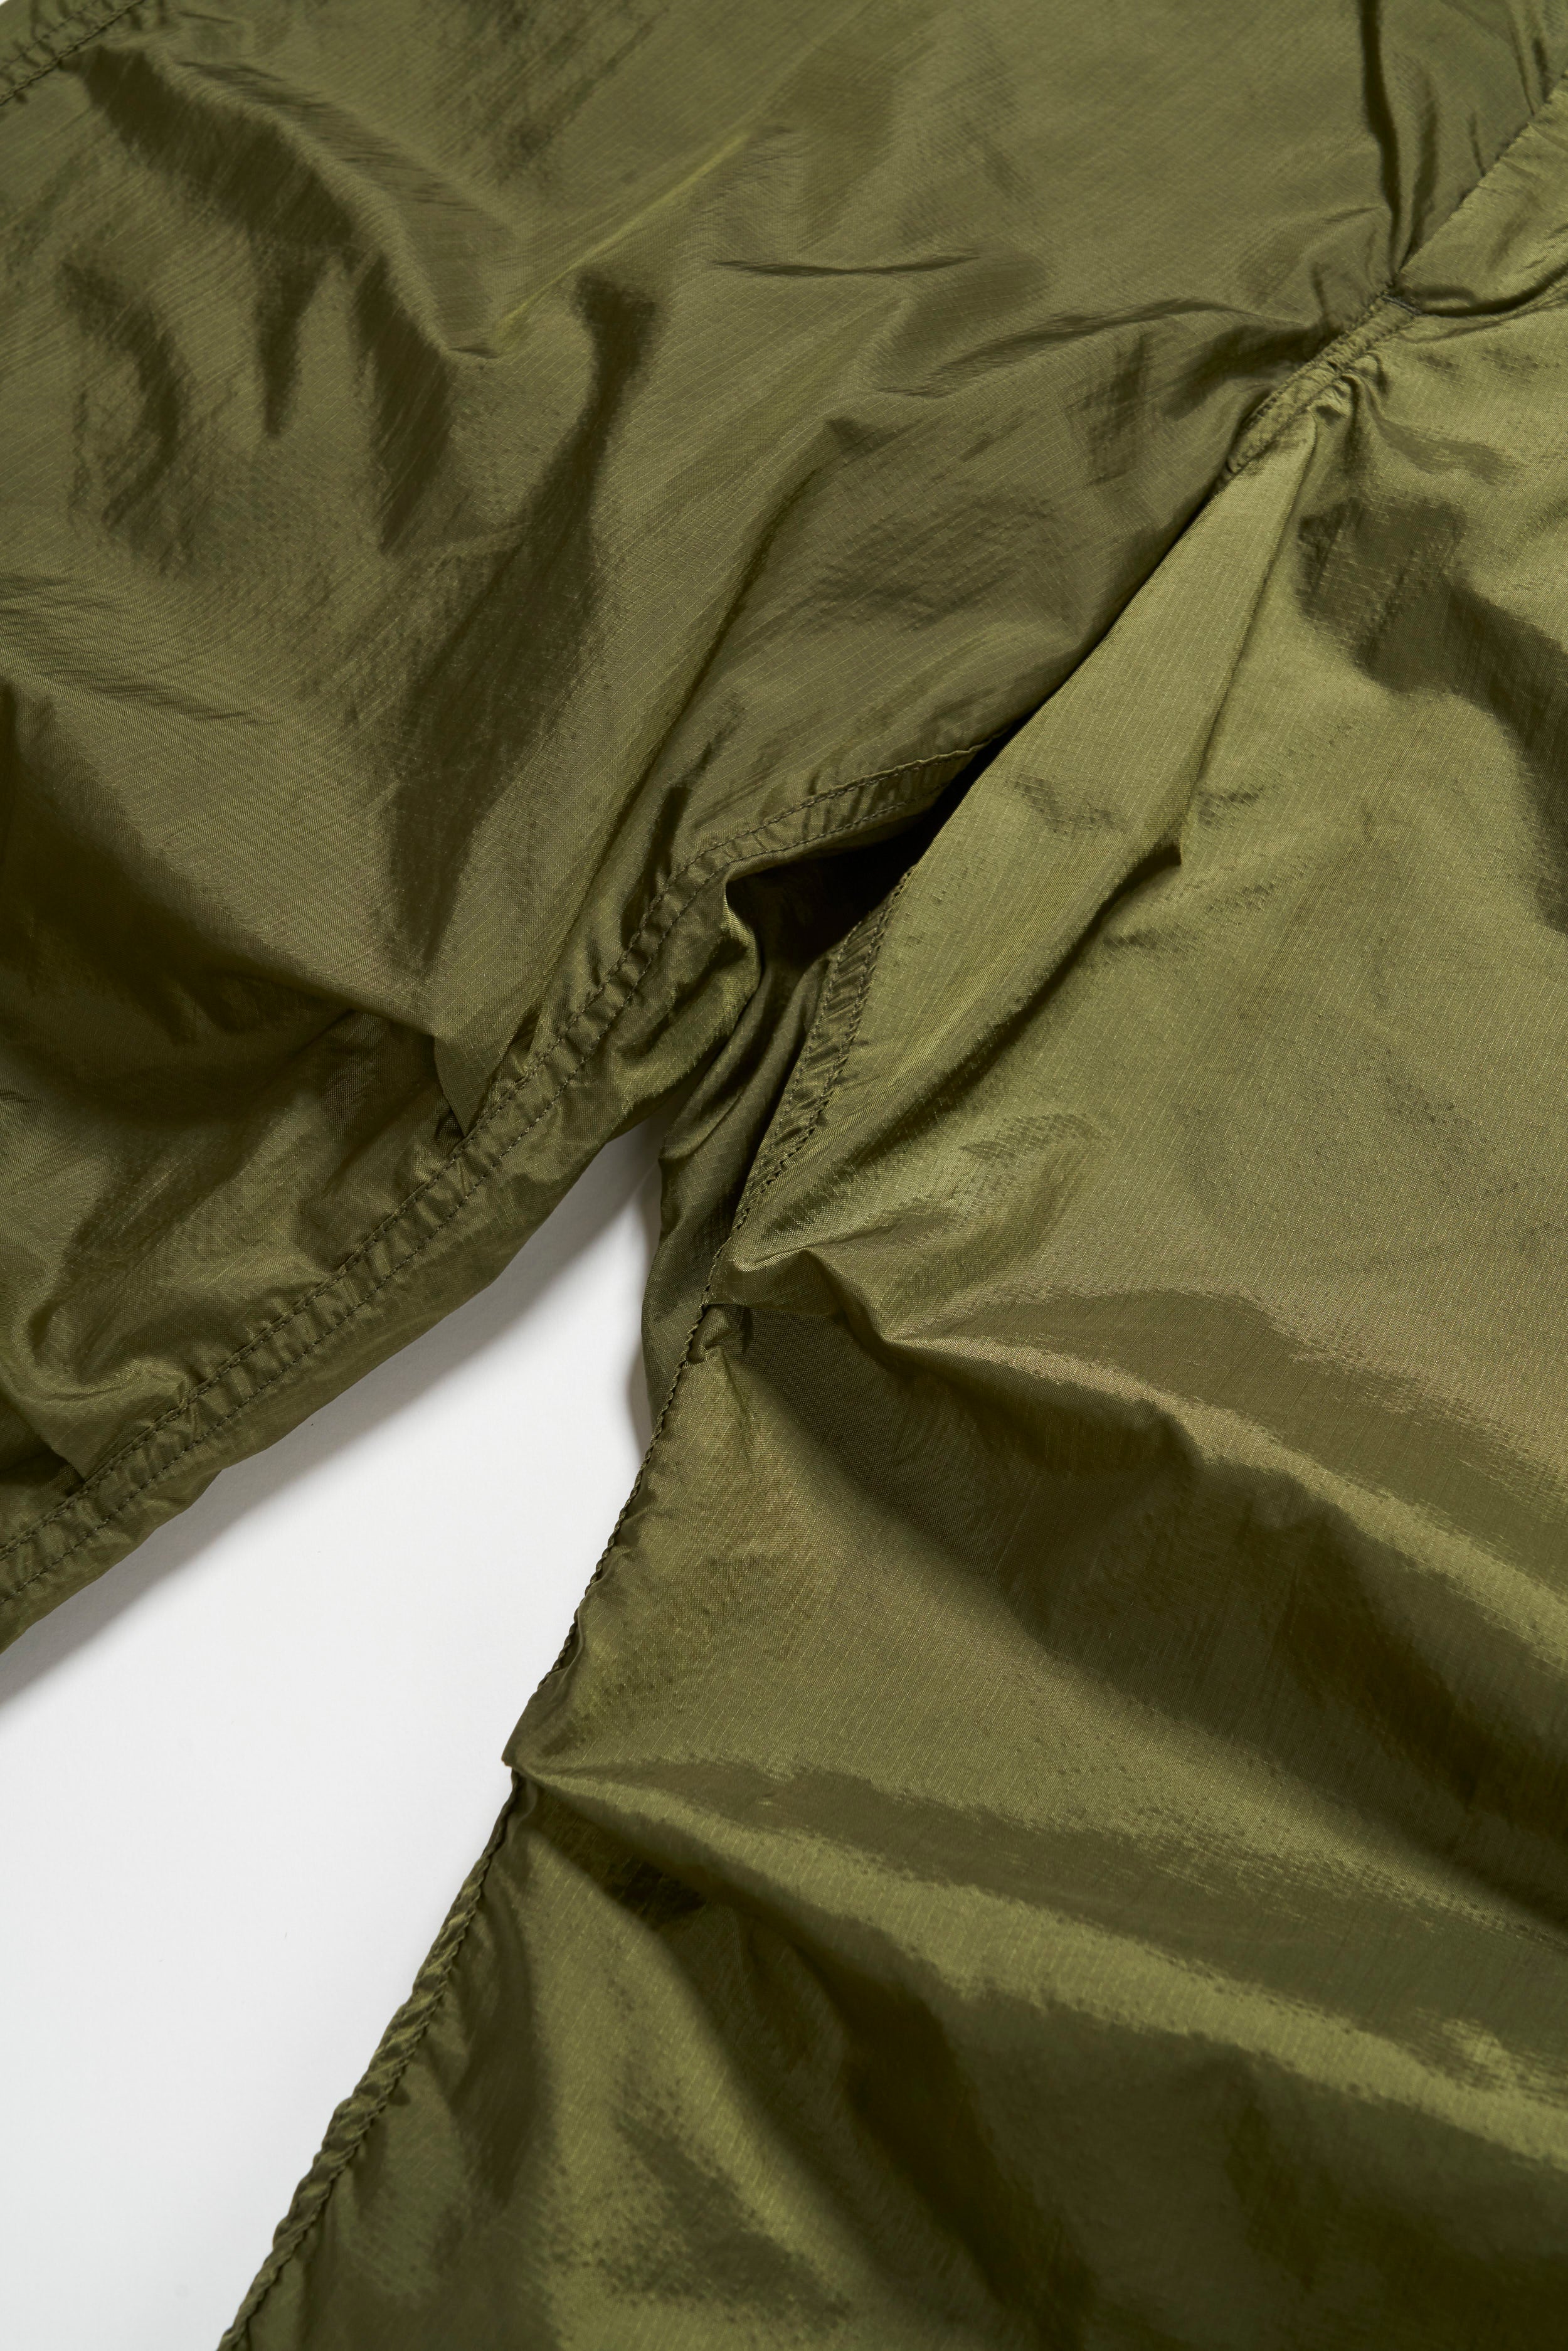 Over Pant - Olive Nylon Ripstop